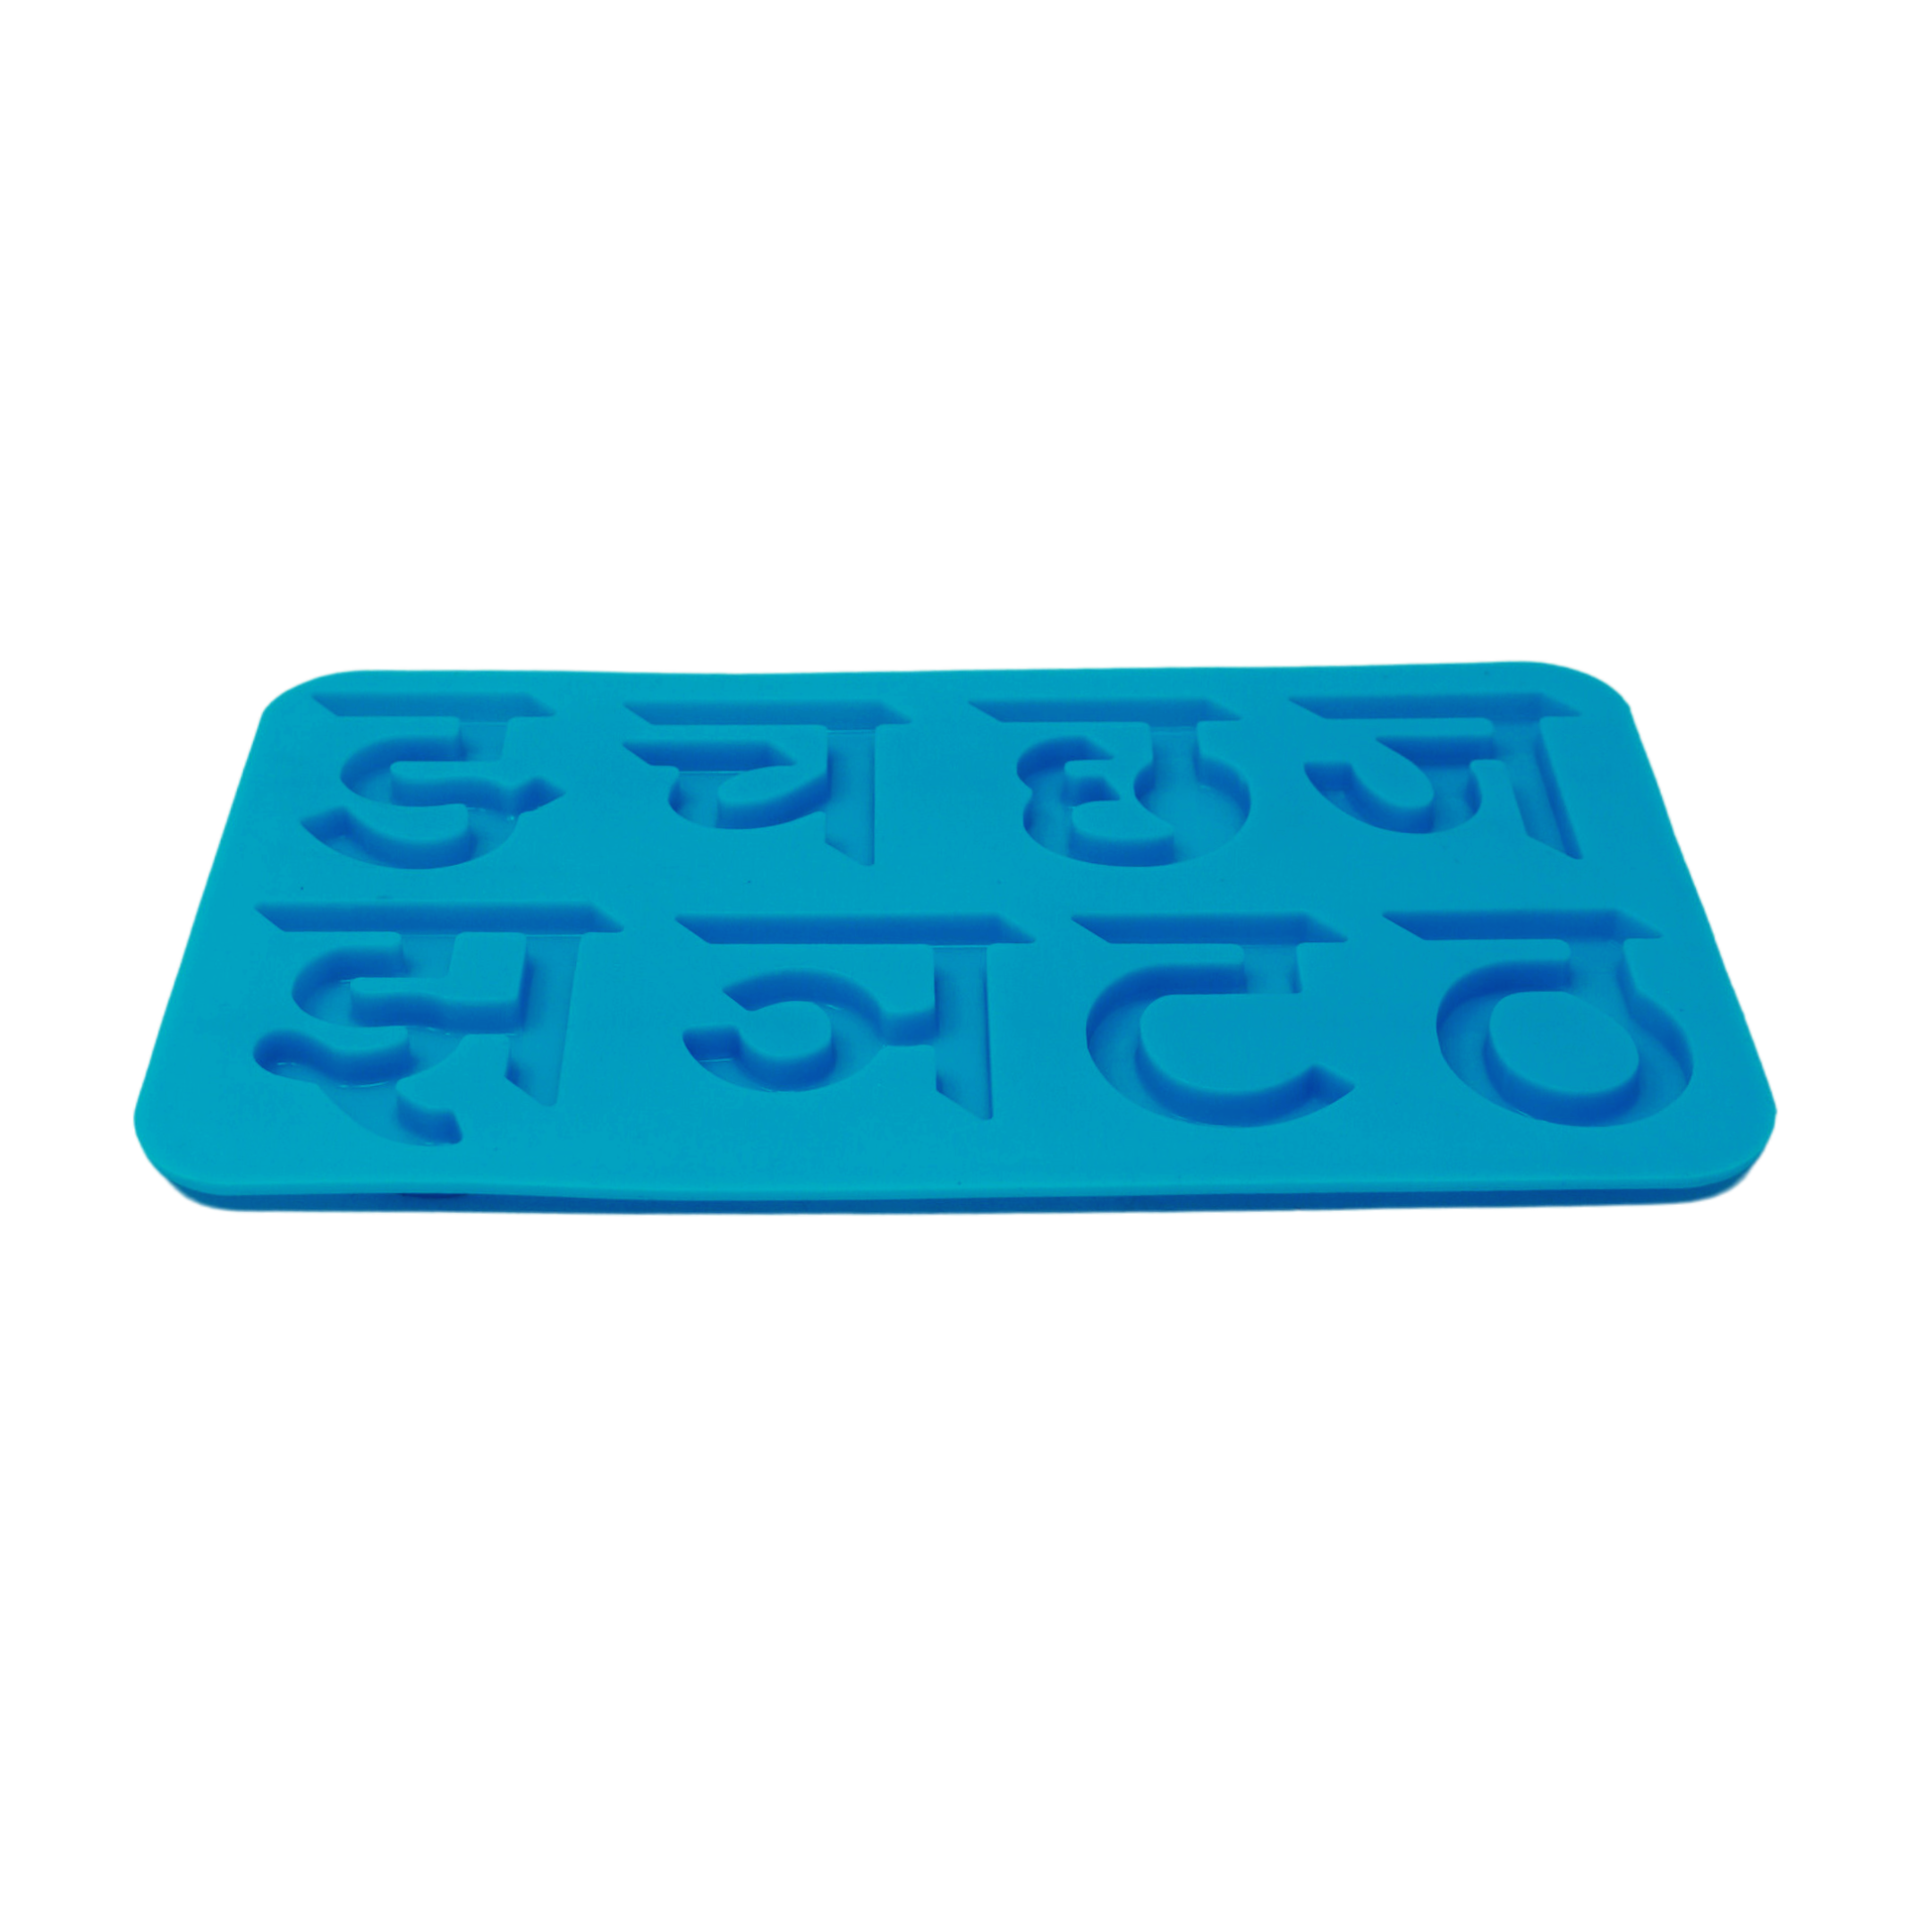 Hindi Alphabets Mould 3 - Tuh - The Mould Story